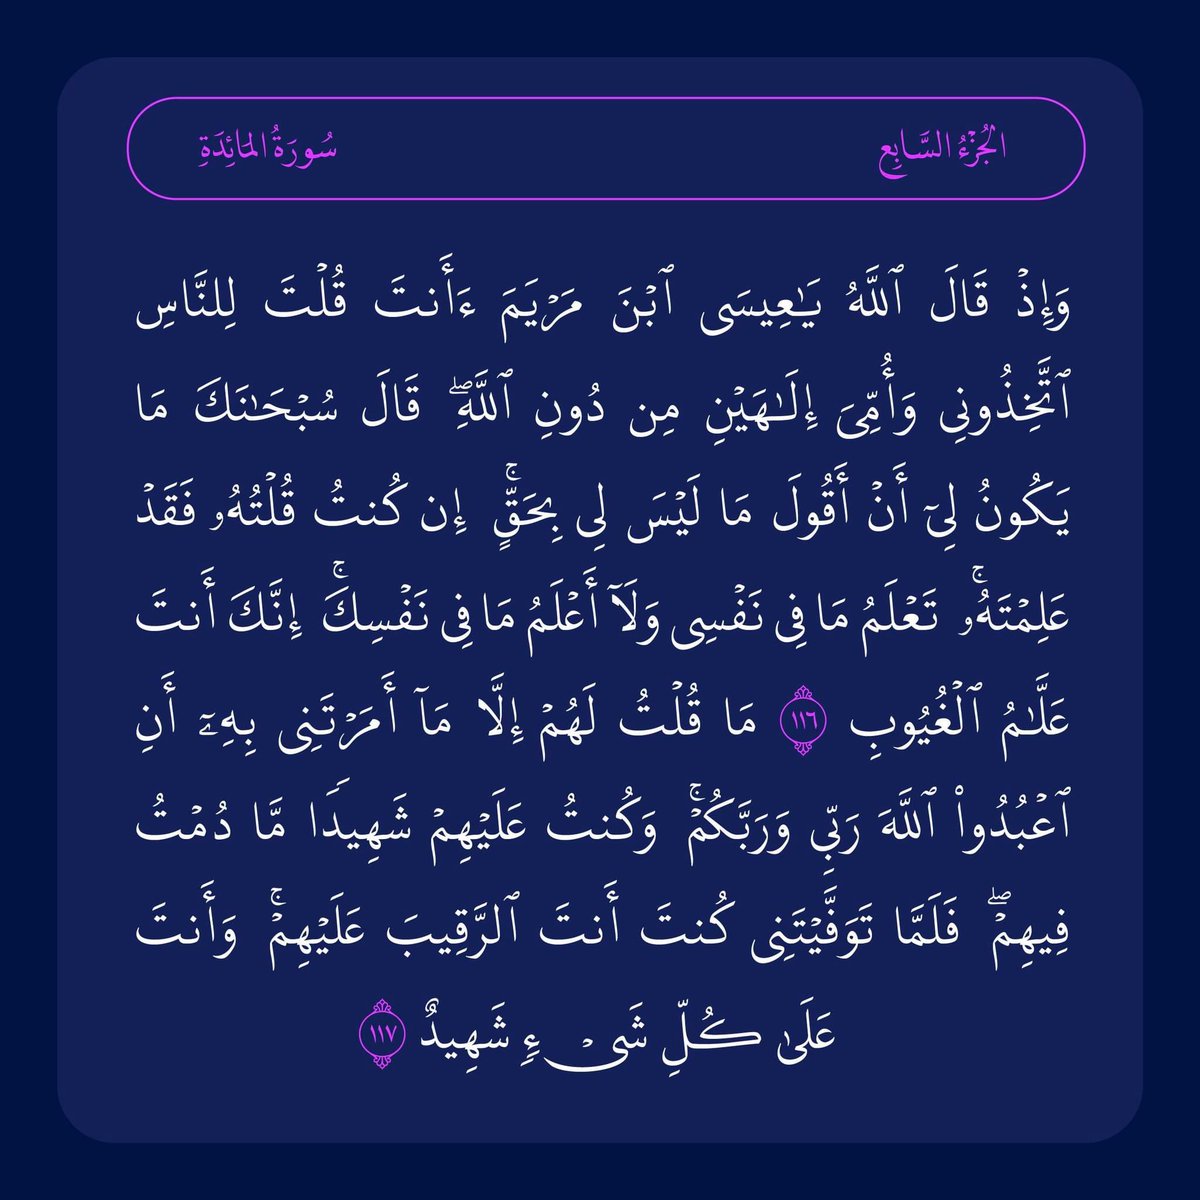 Uthmani is a specialized computer typeface designed to display the Quranic text in the Hafs narration. It has been fully developed by @HadiTypeFoundry All characters, ligatures written by Mohammed Hadi @Muhamme71975428 #quranfont #arabictypegraphy #quran #arabicfont